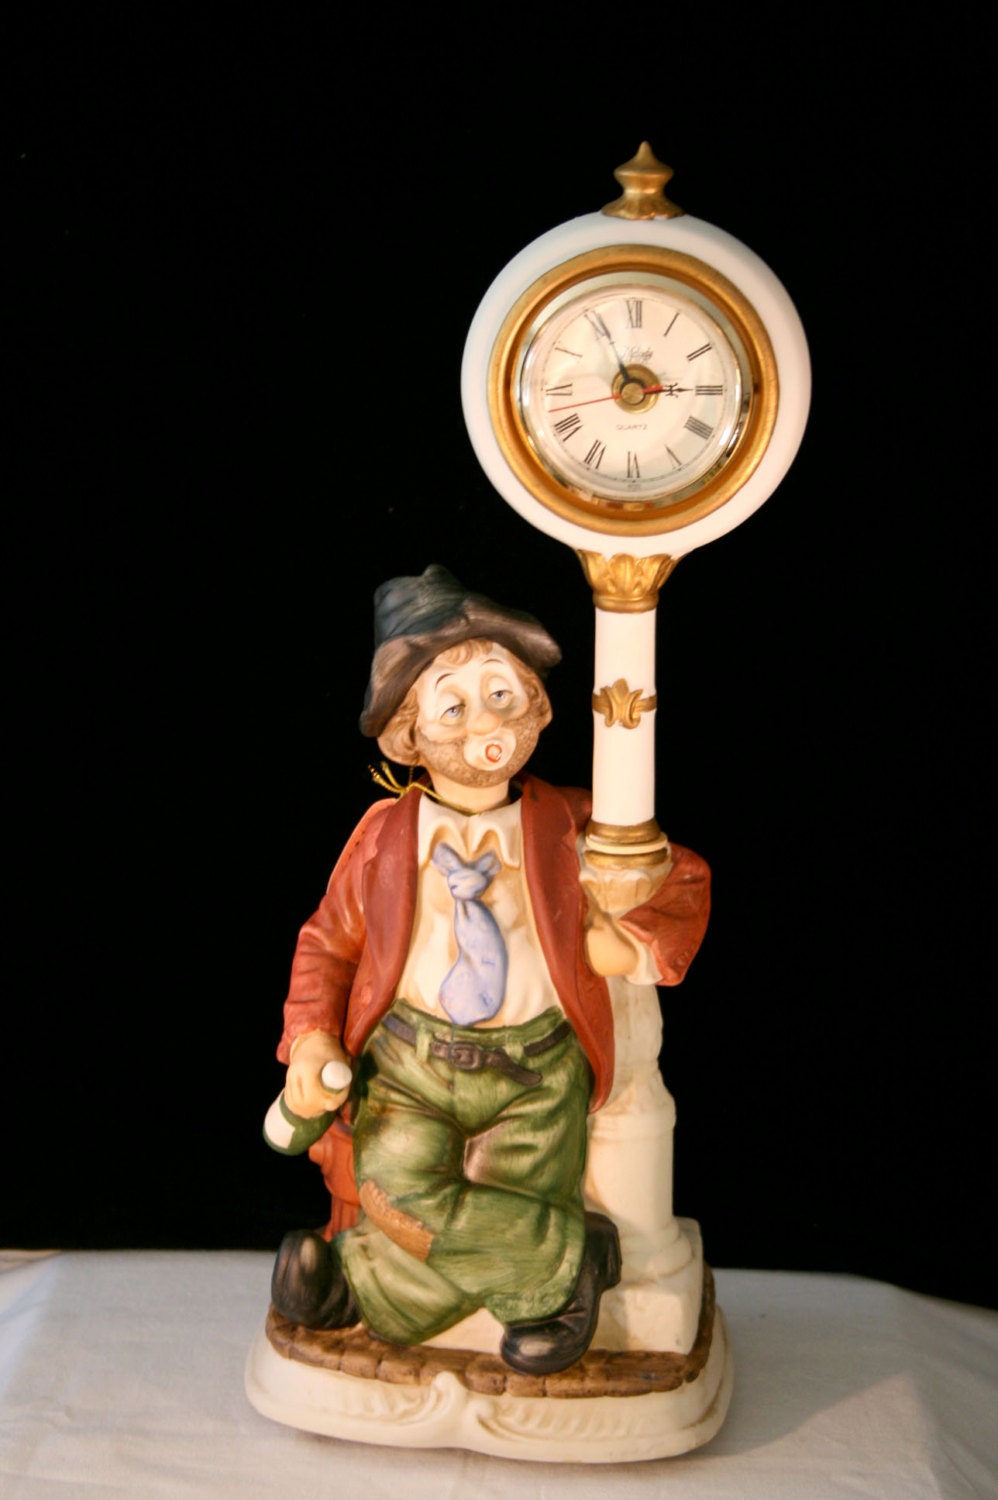 1988 Waco Clockpost Willie Melody in Motion signed